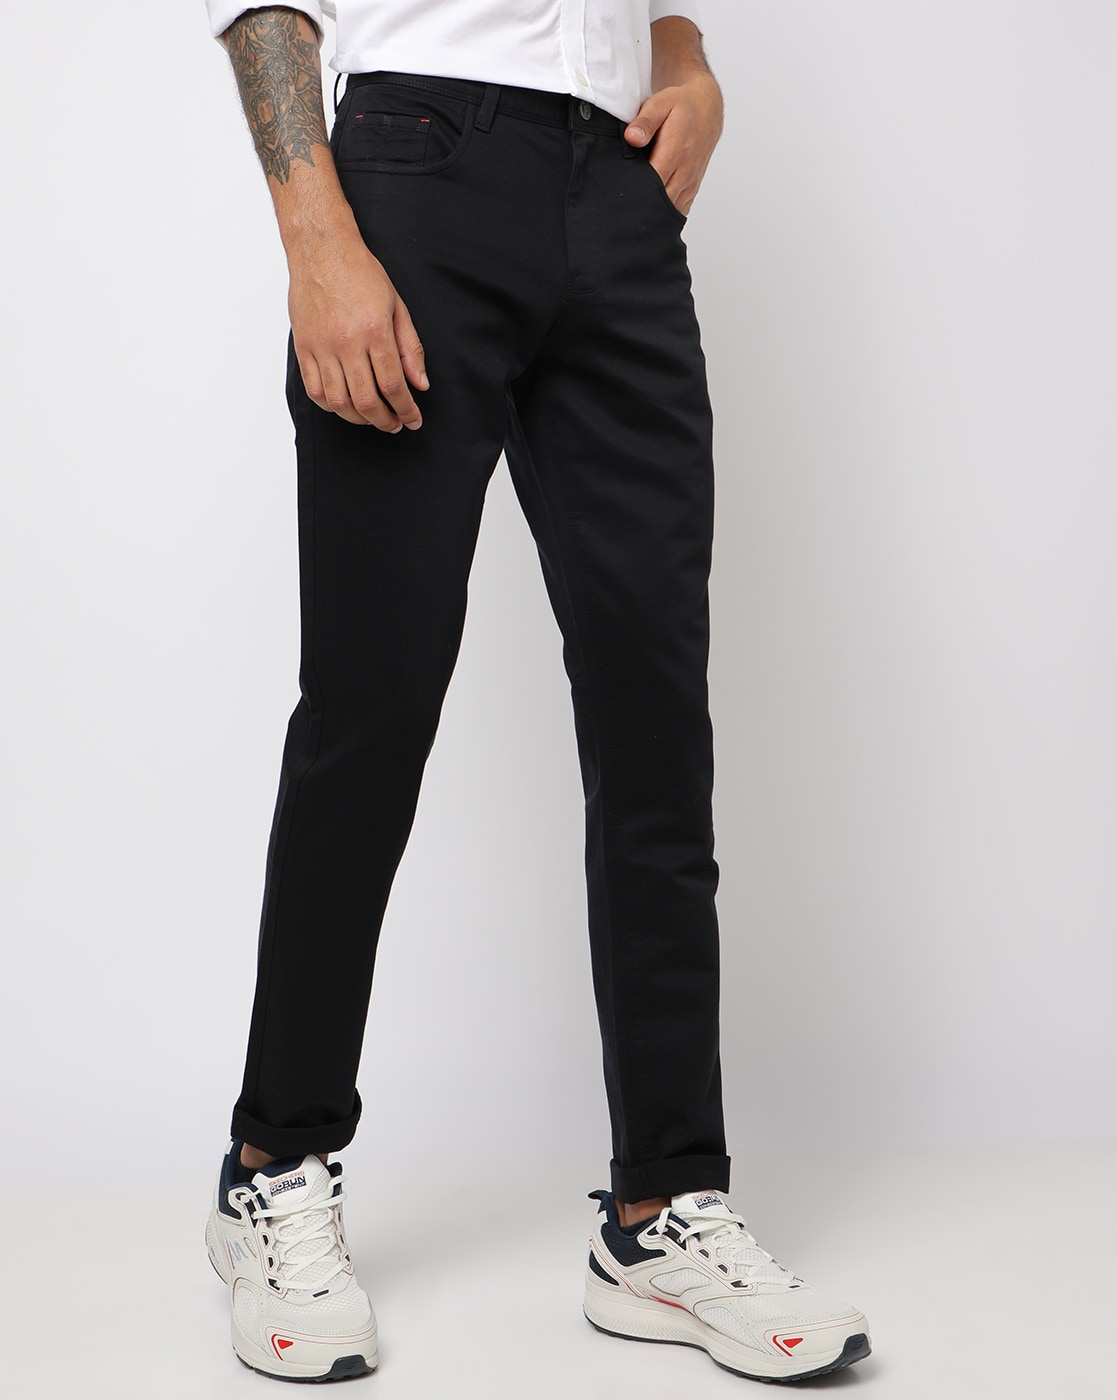 NETPLAY Textured Slim Fit Trousers With Insert Pockets|BDF Shopping